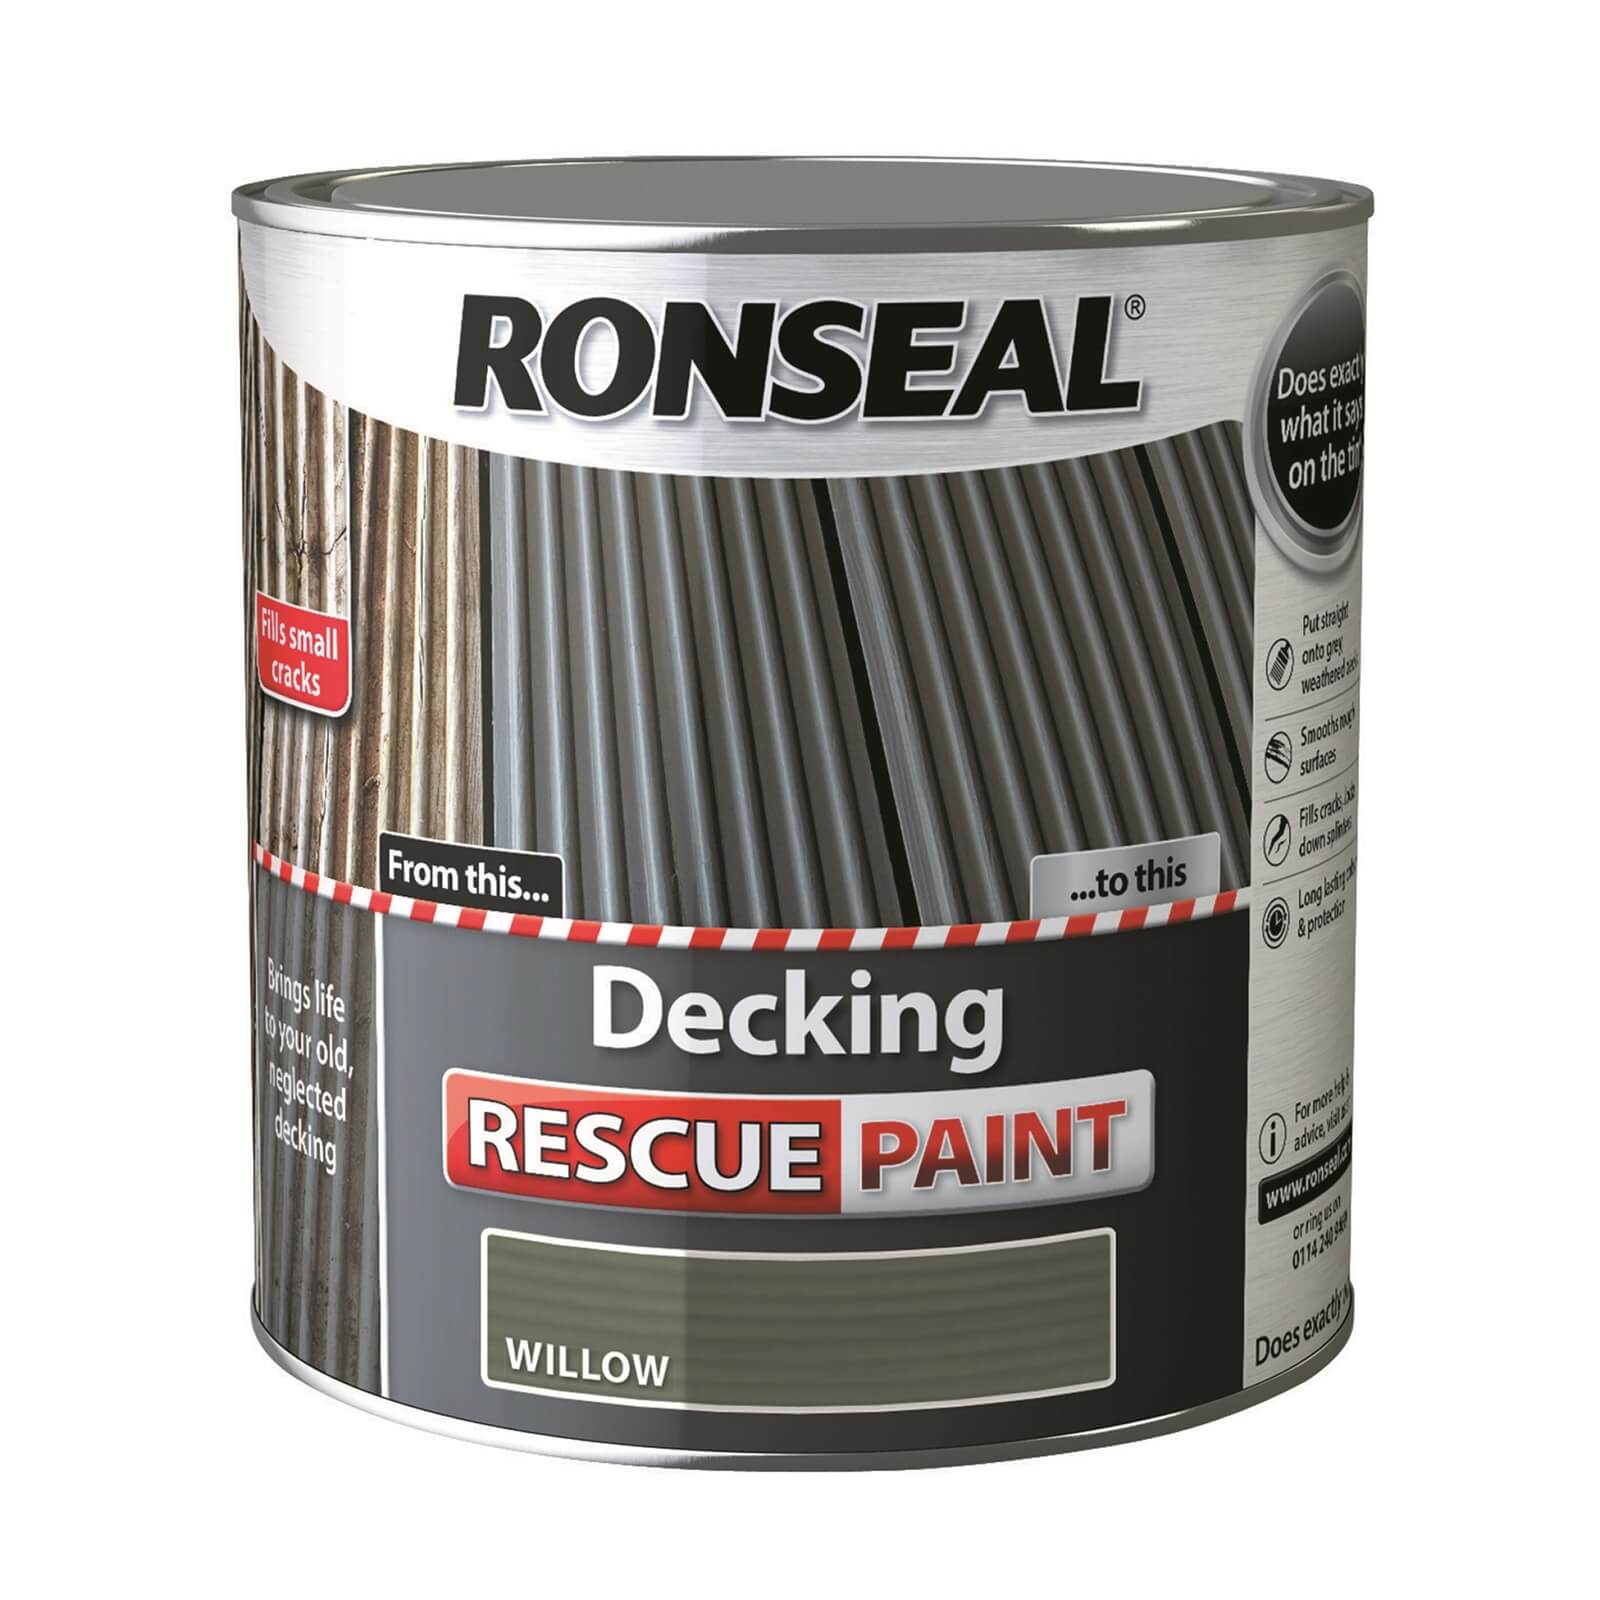 Ronseal Decking Rescue Paint Willow - 2.5L